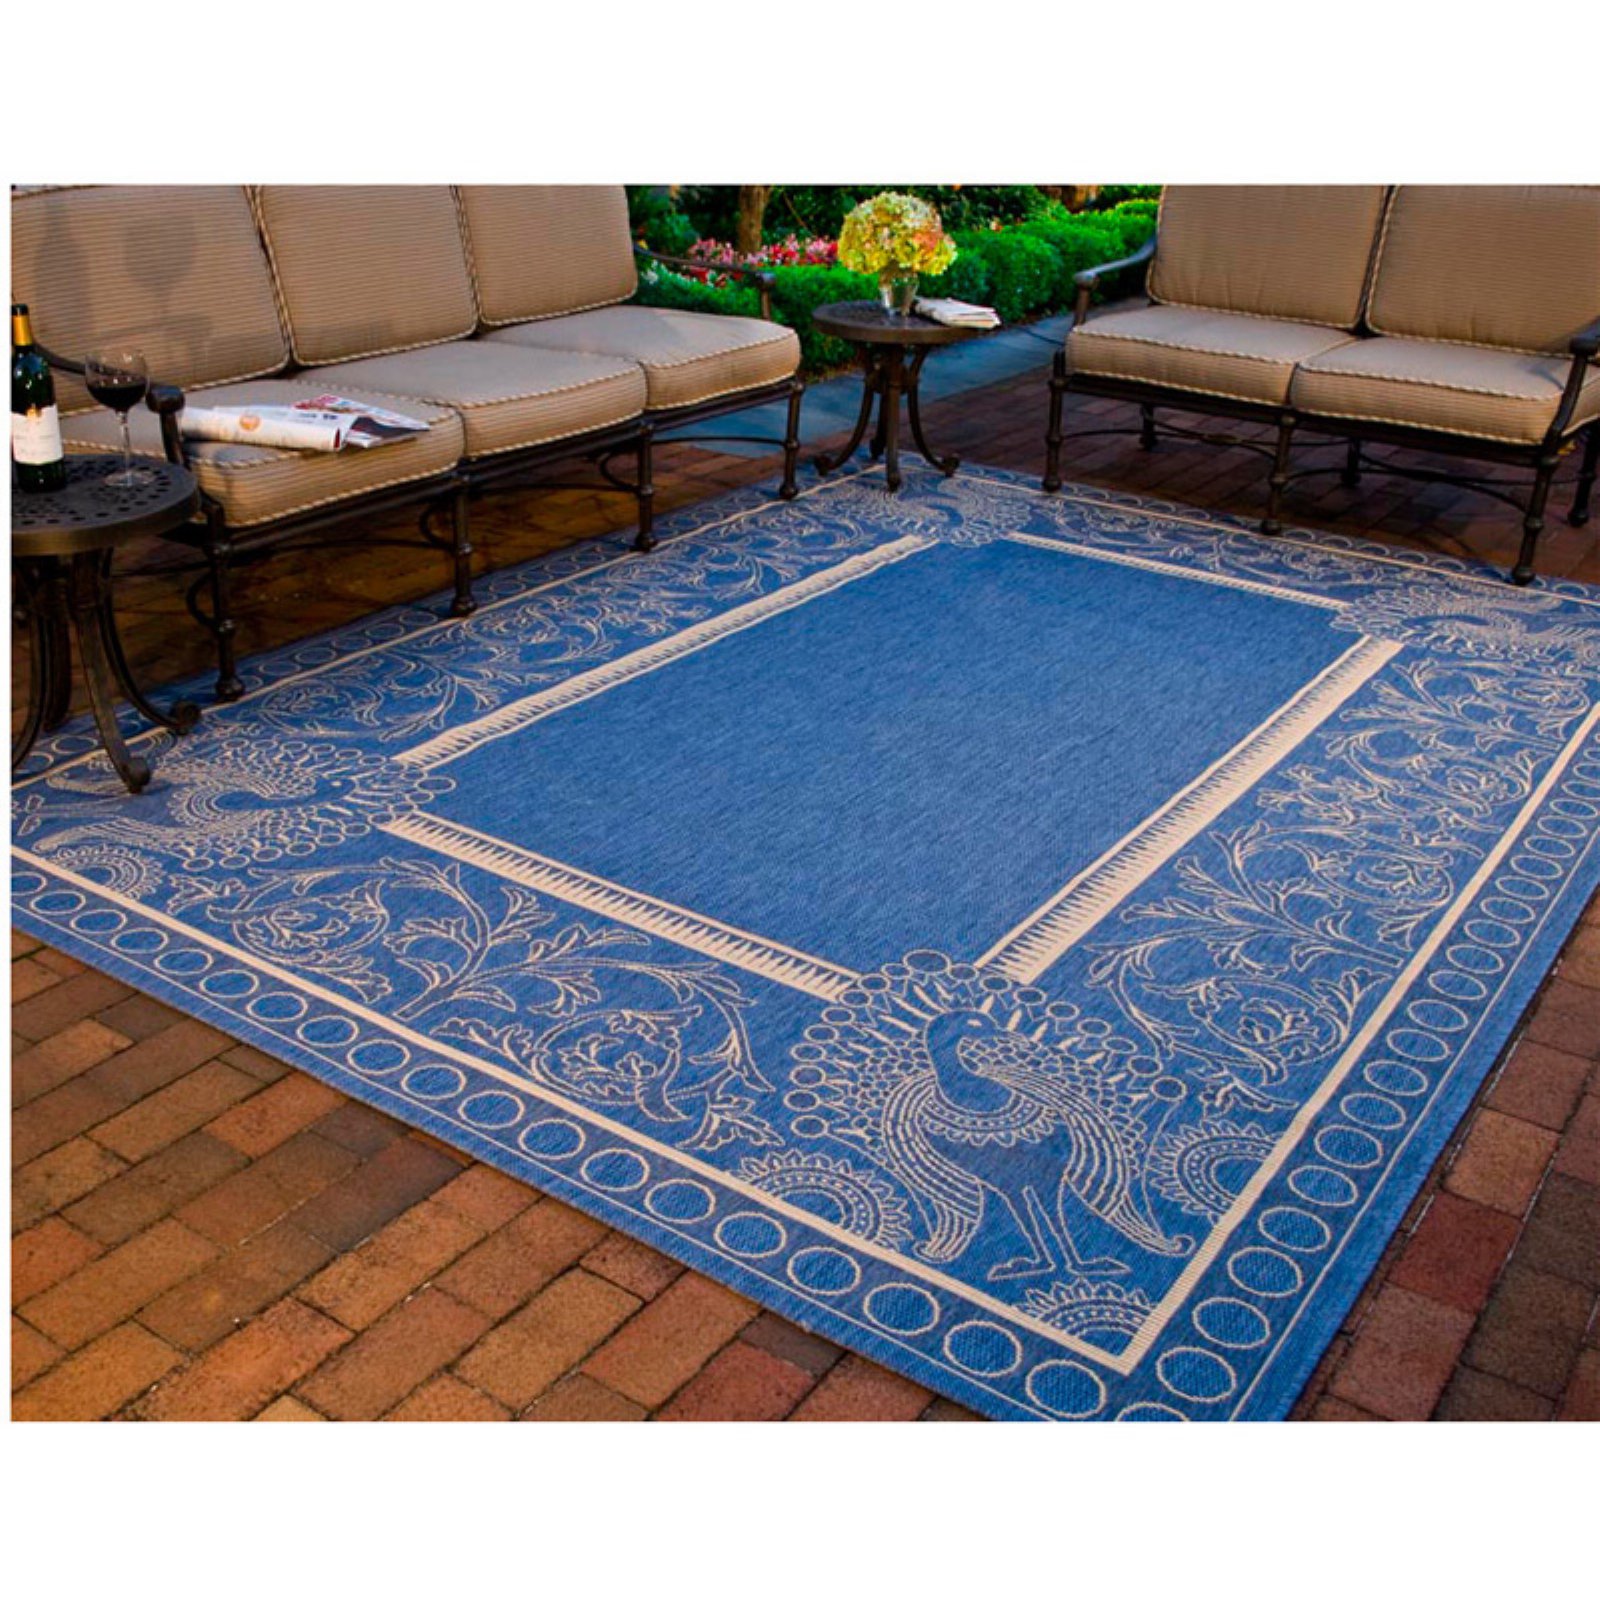 SAFAVIEH Courtyard Cooper Floral Indoor/Outdoor Area Rug, 5'3" x 7'7", Blue/Natural - image 3 of 3